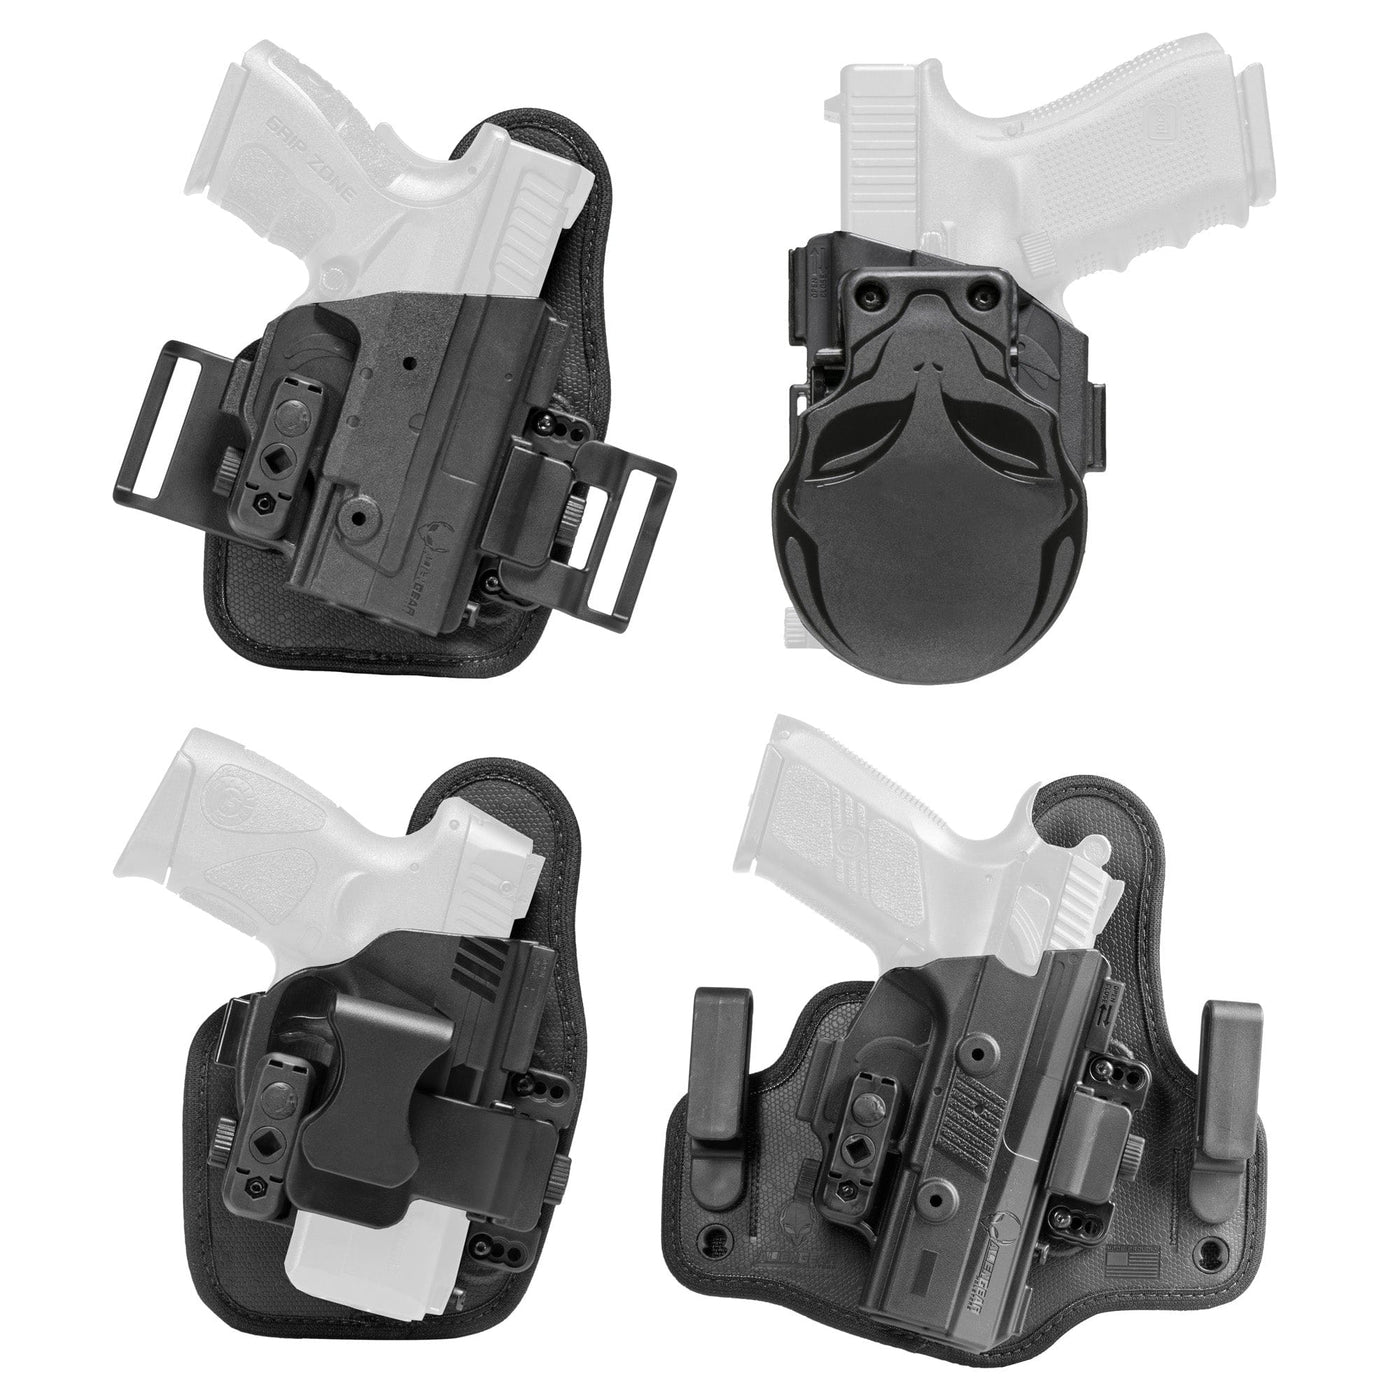 Alien Gear Holsters Agh Shpshift Core Cry Pk For Glk 19 Holsters